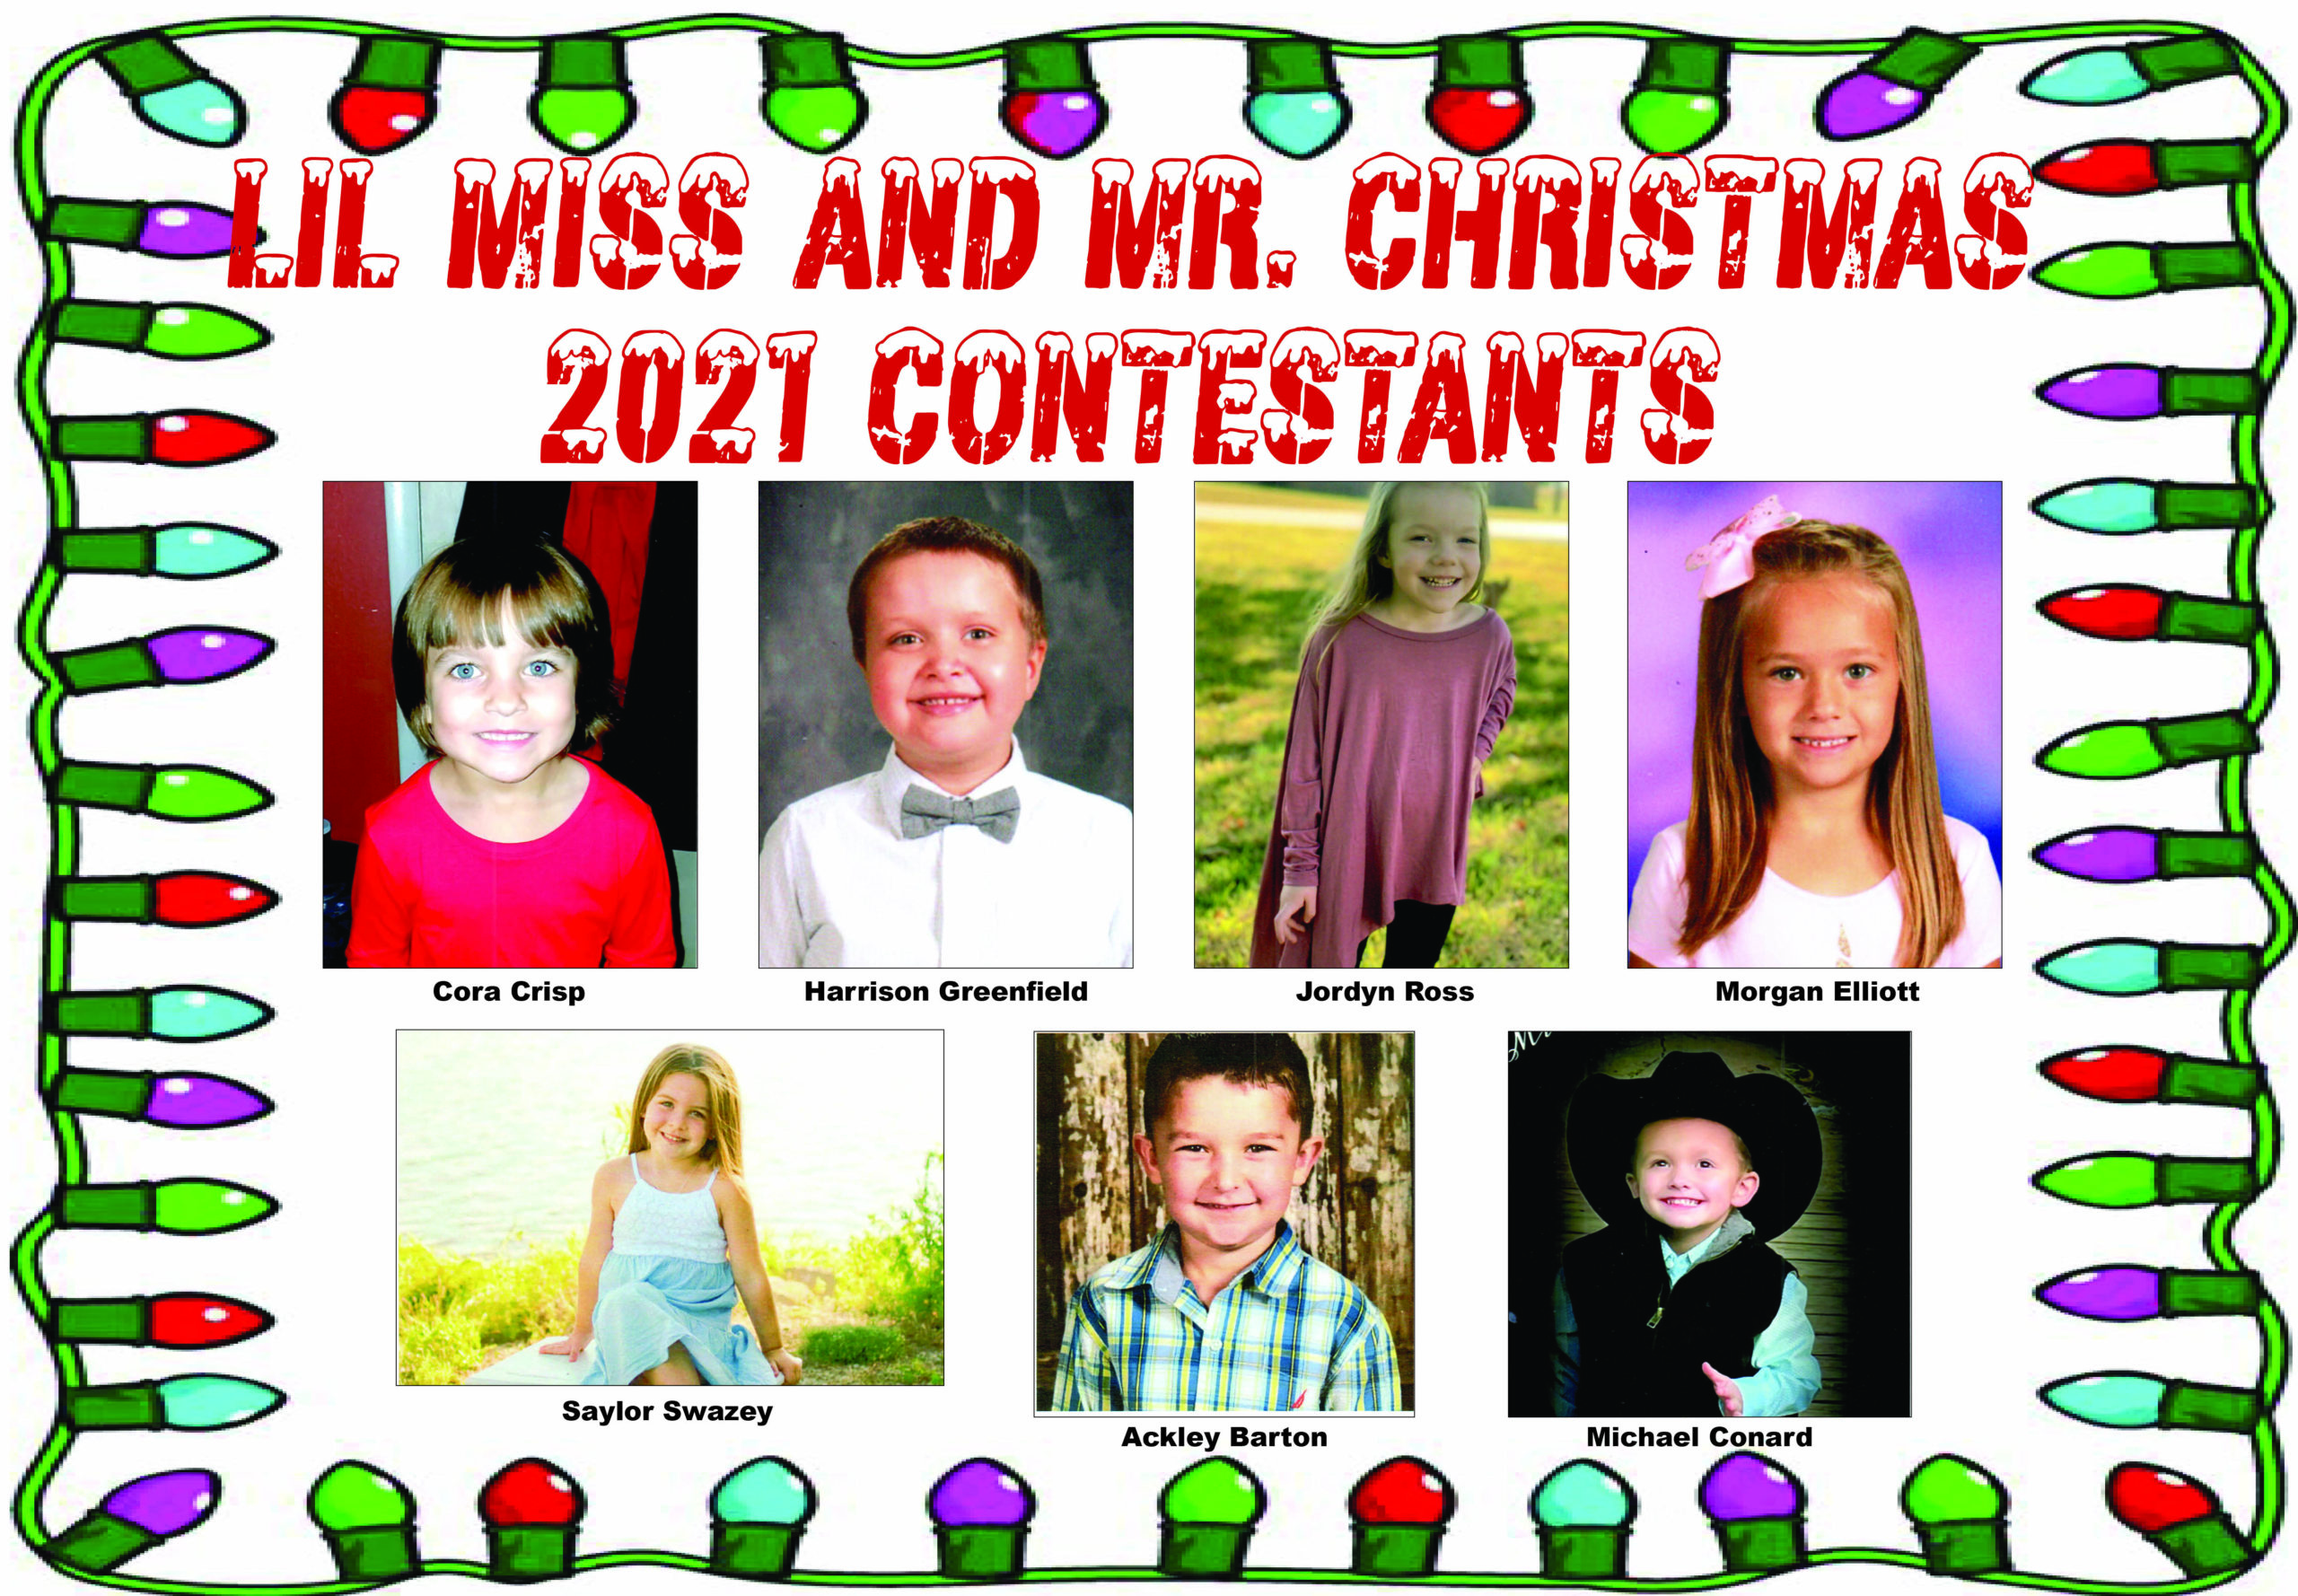 Little Miss and Mr. Christmas Contest